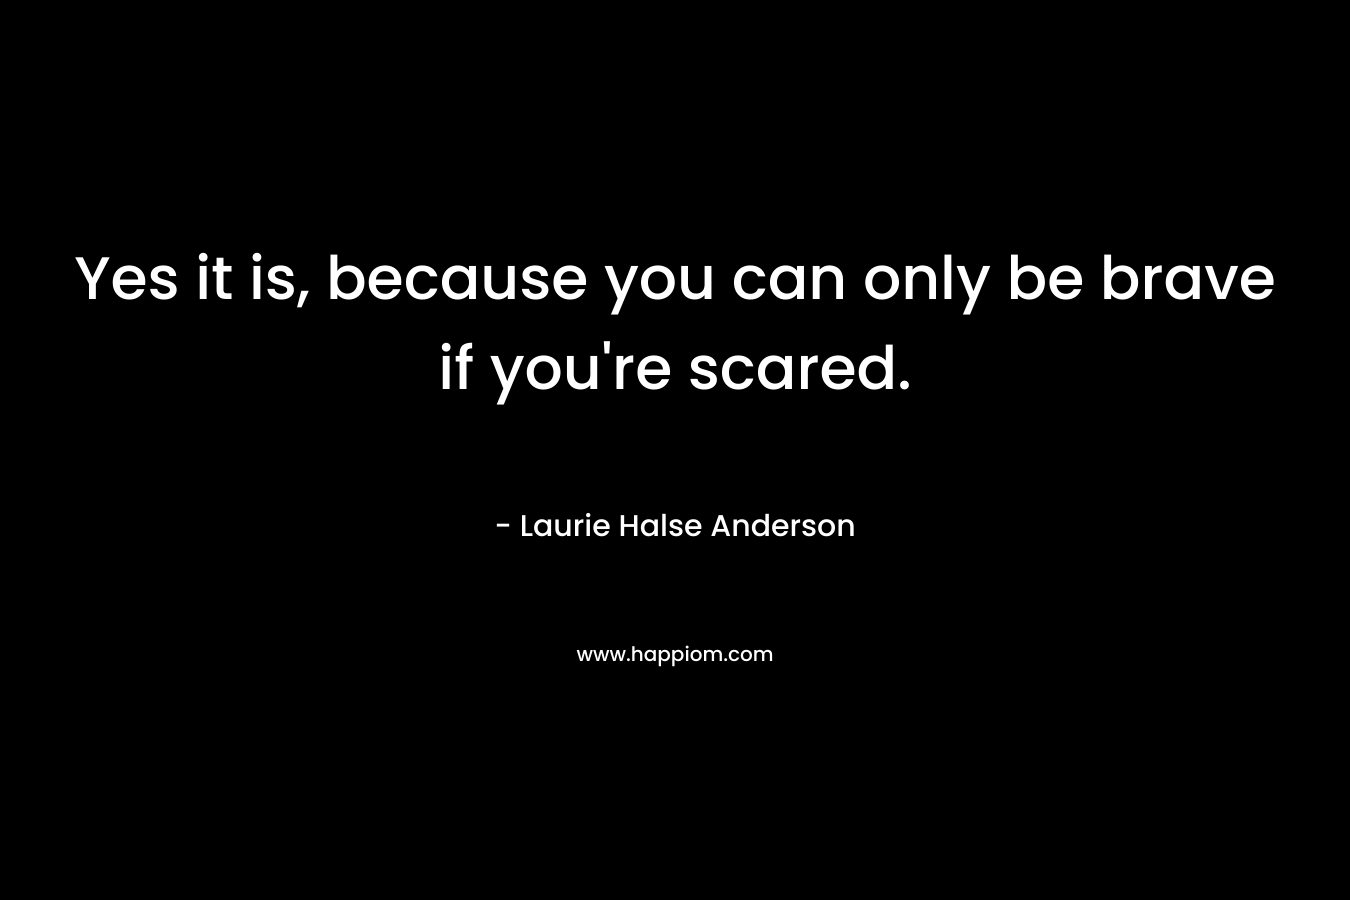 Yes it is, because you can only be brave if you’re scared. – Laurie Halse Anderson